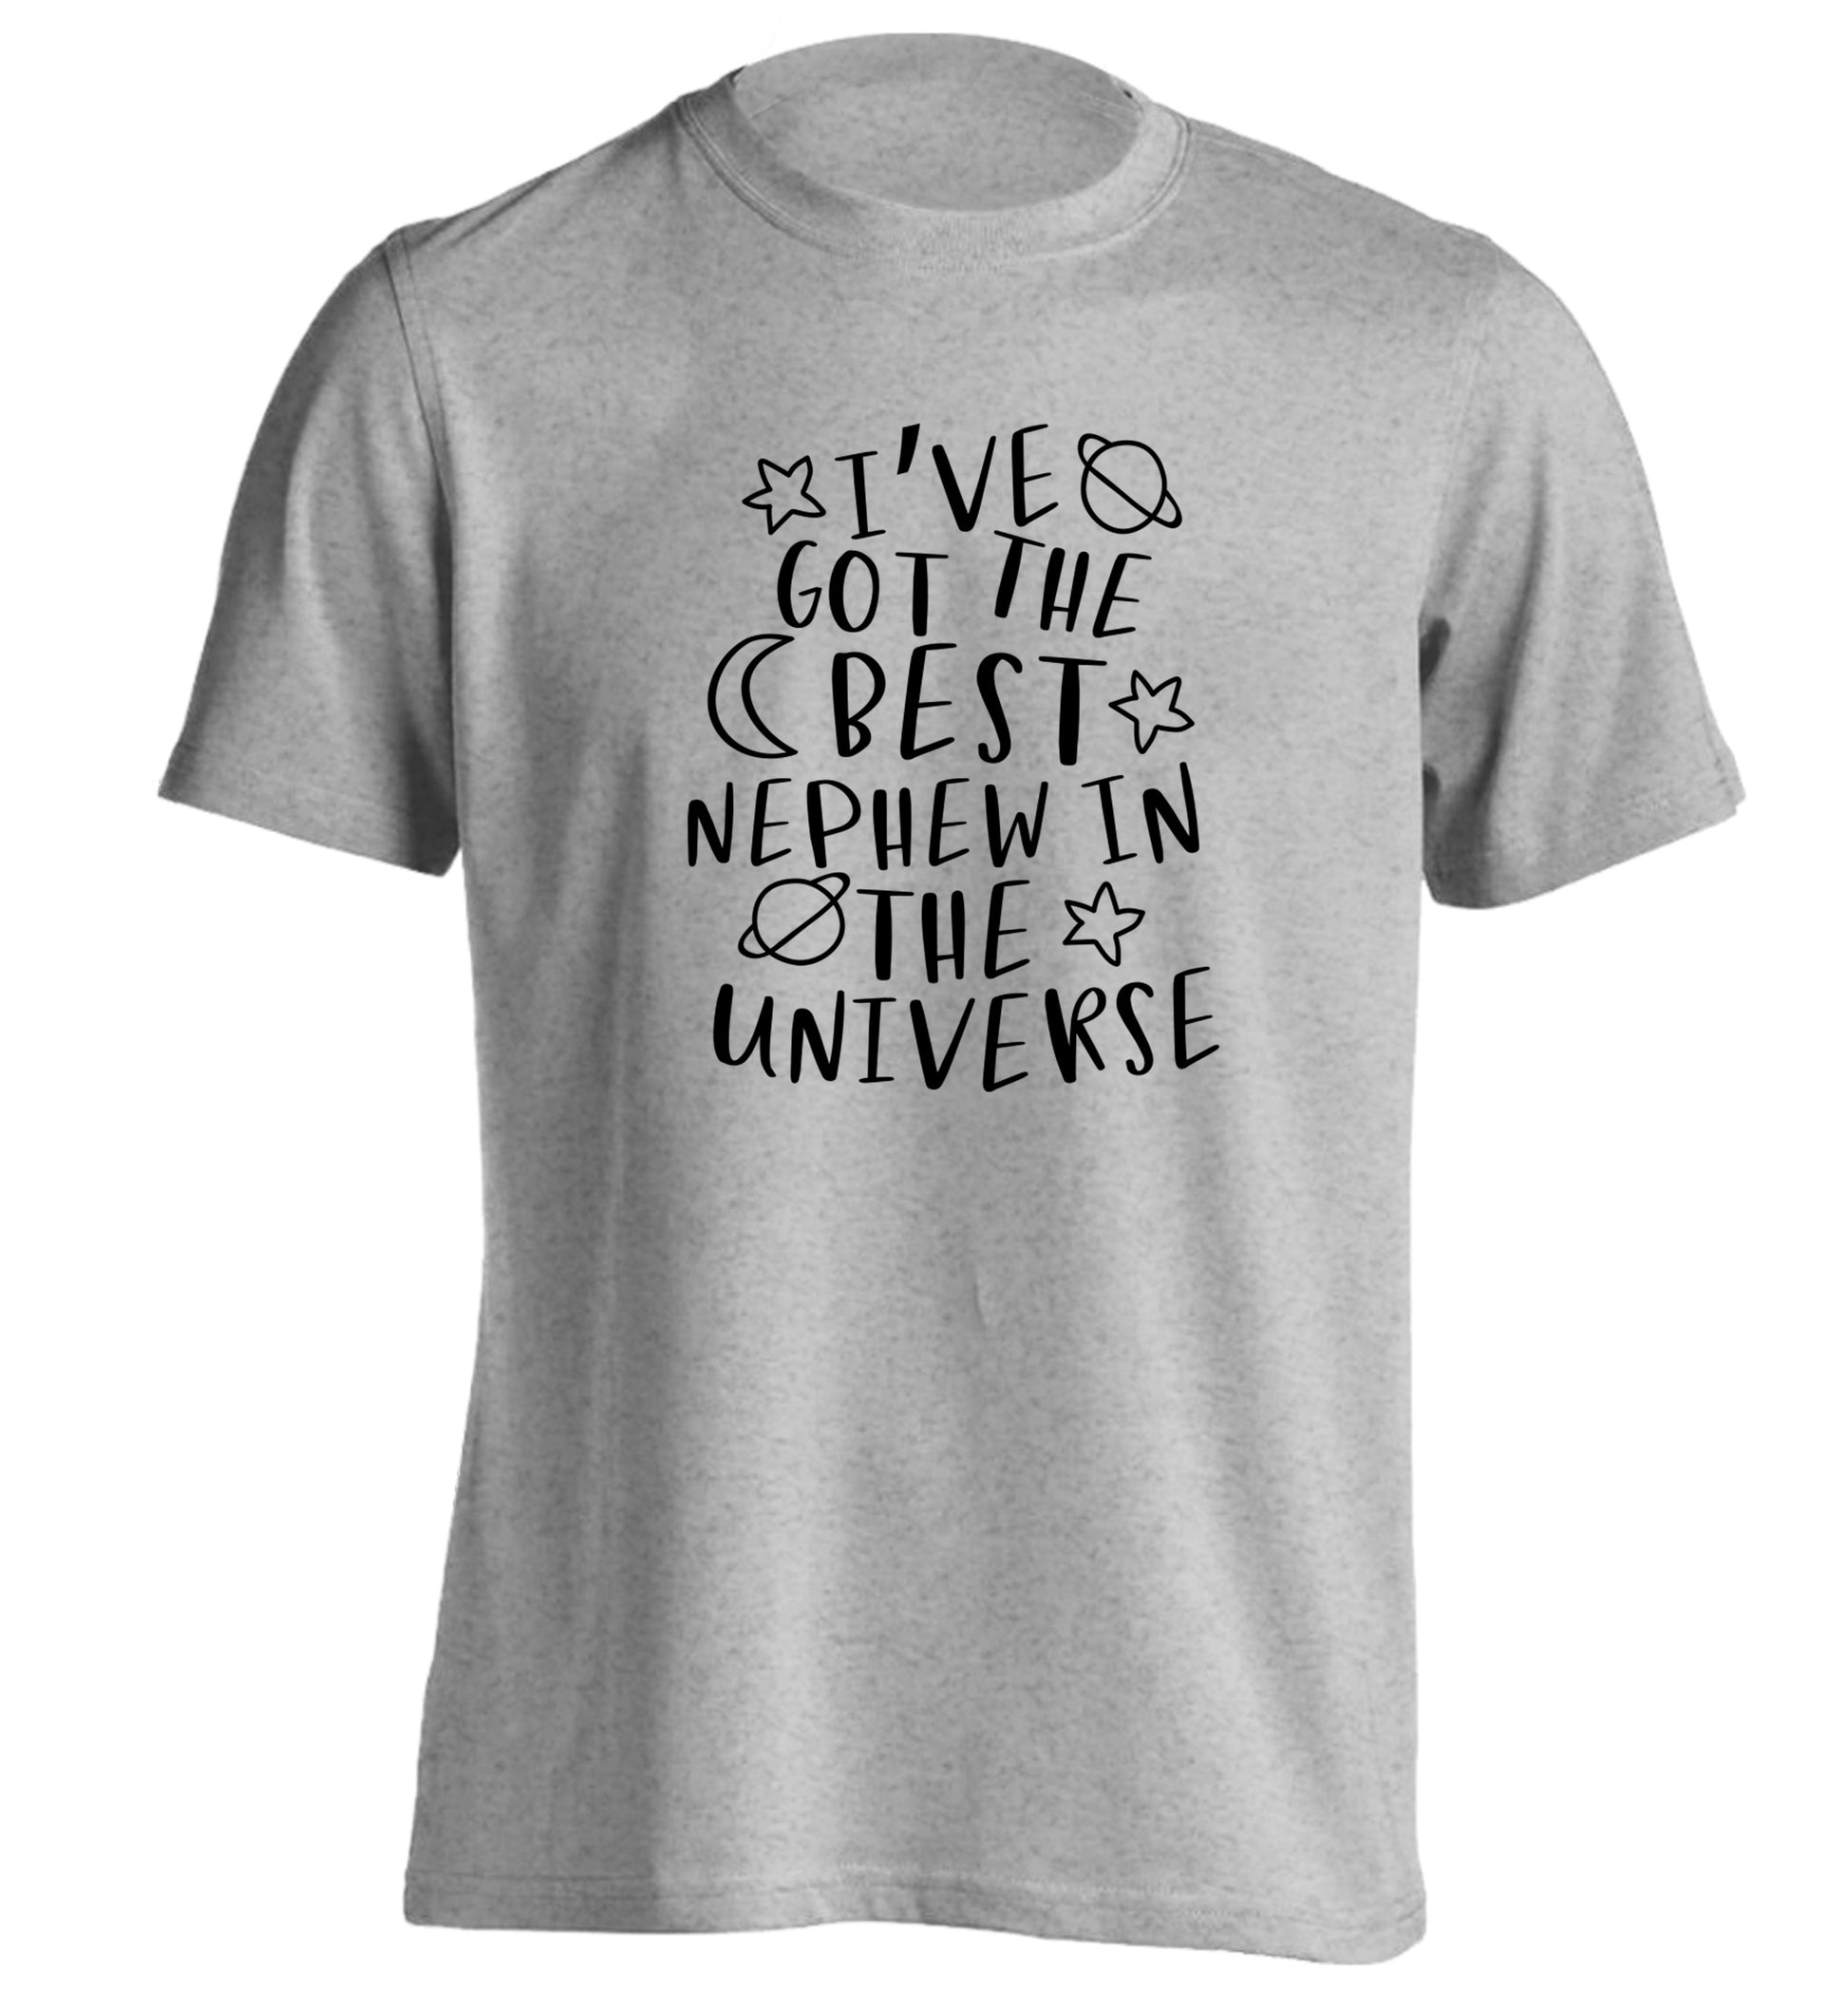 I've got the best nephew in the universe adults unisex grey Tshirt 2XL